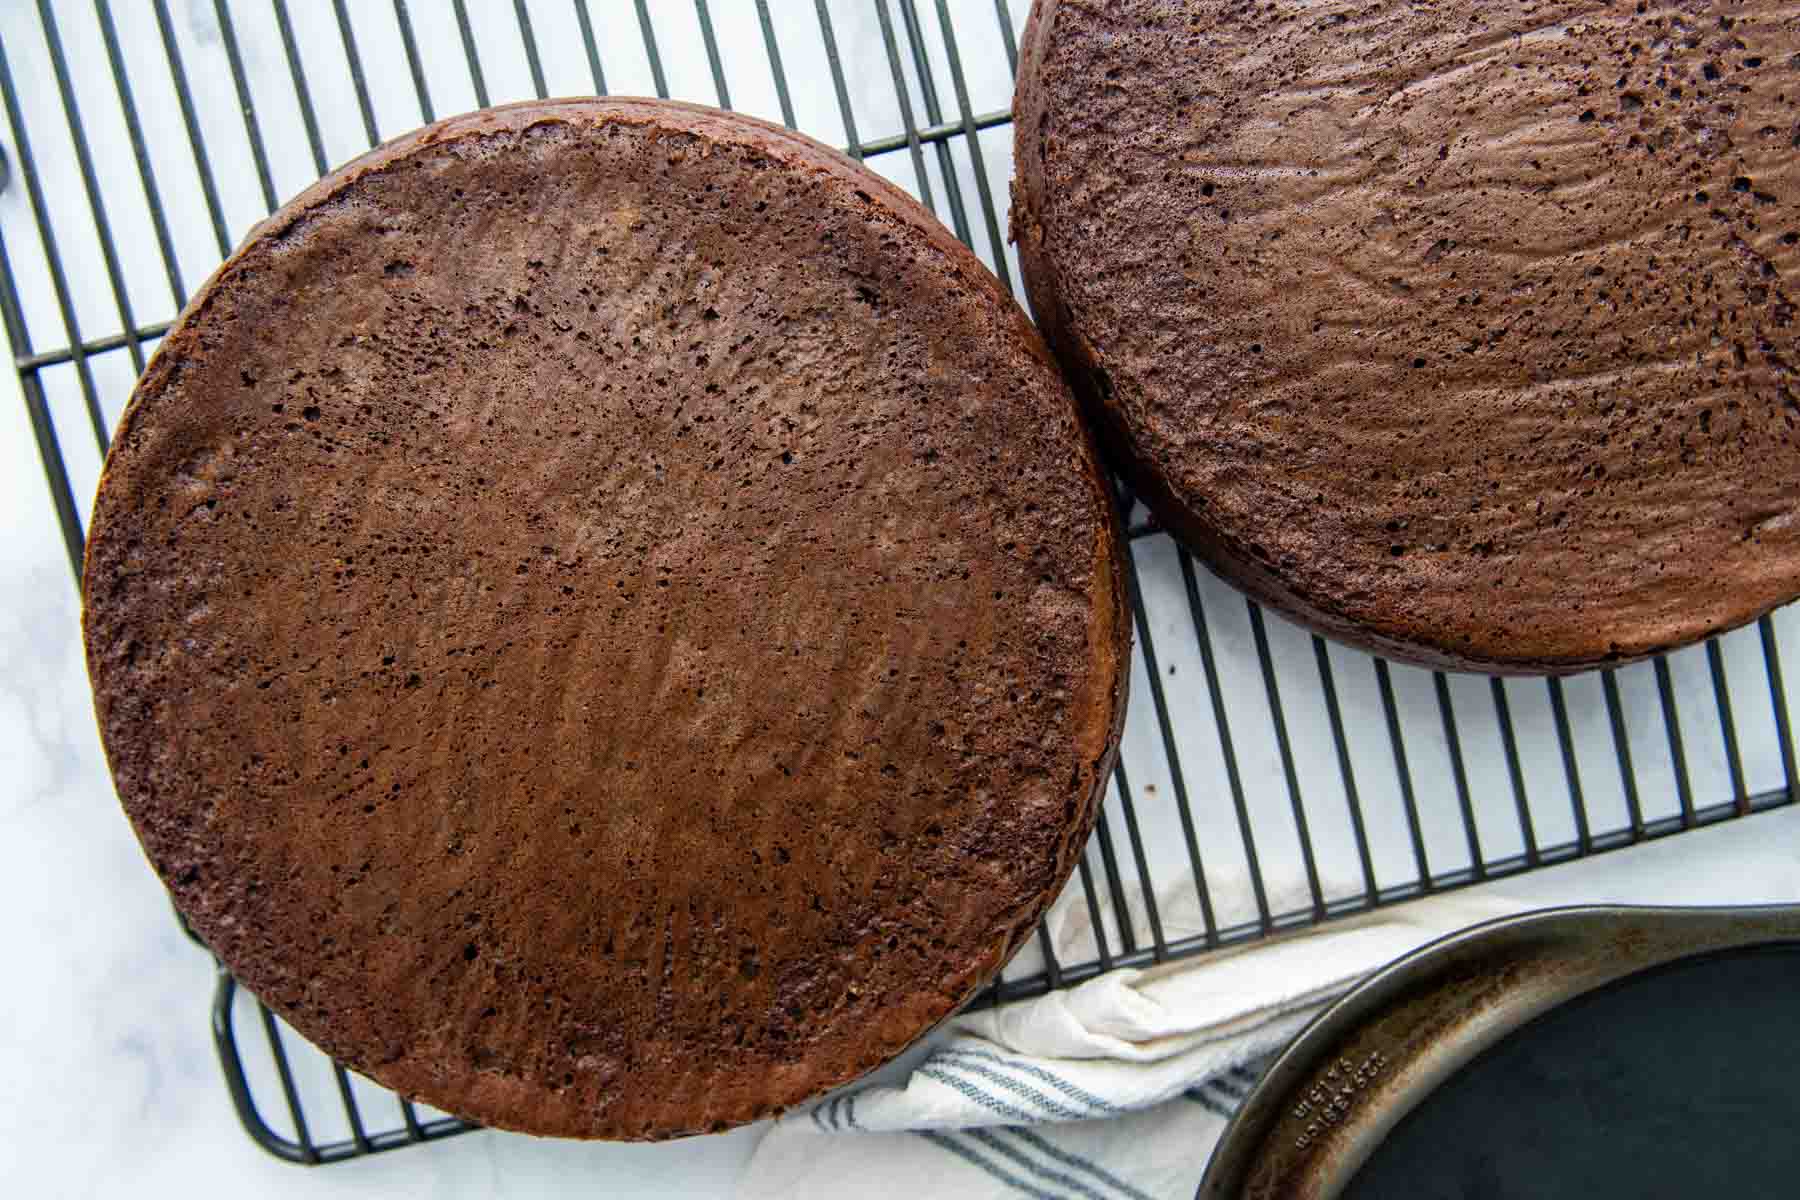 baked cakes on a cooling rack.